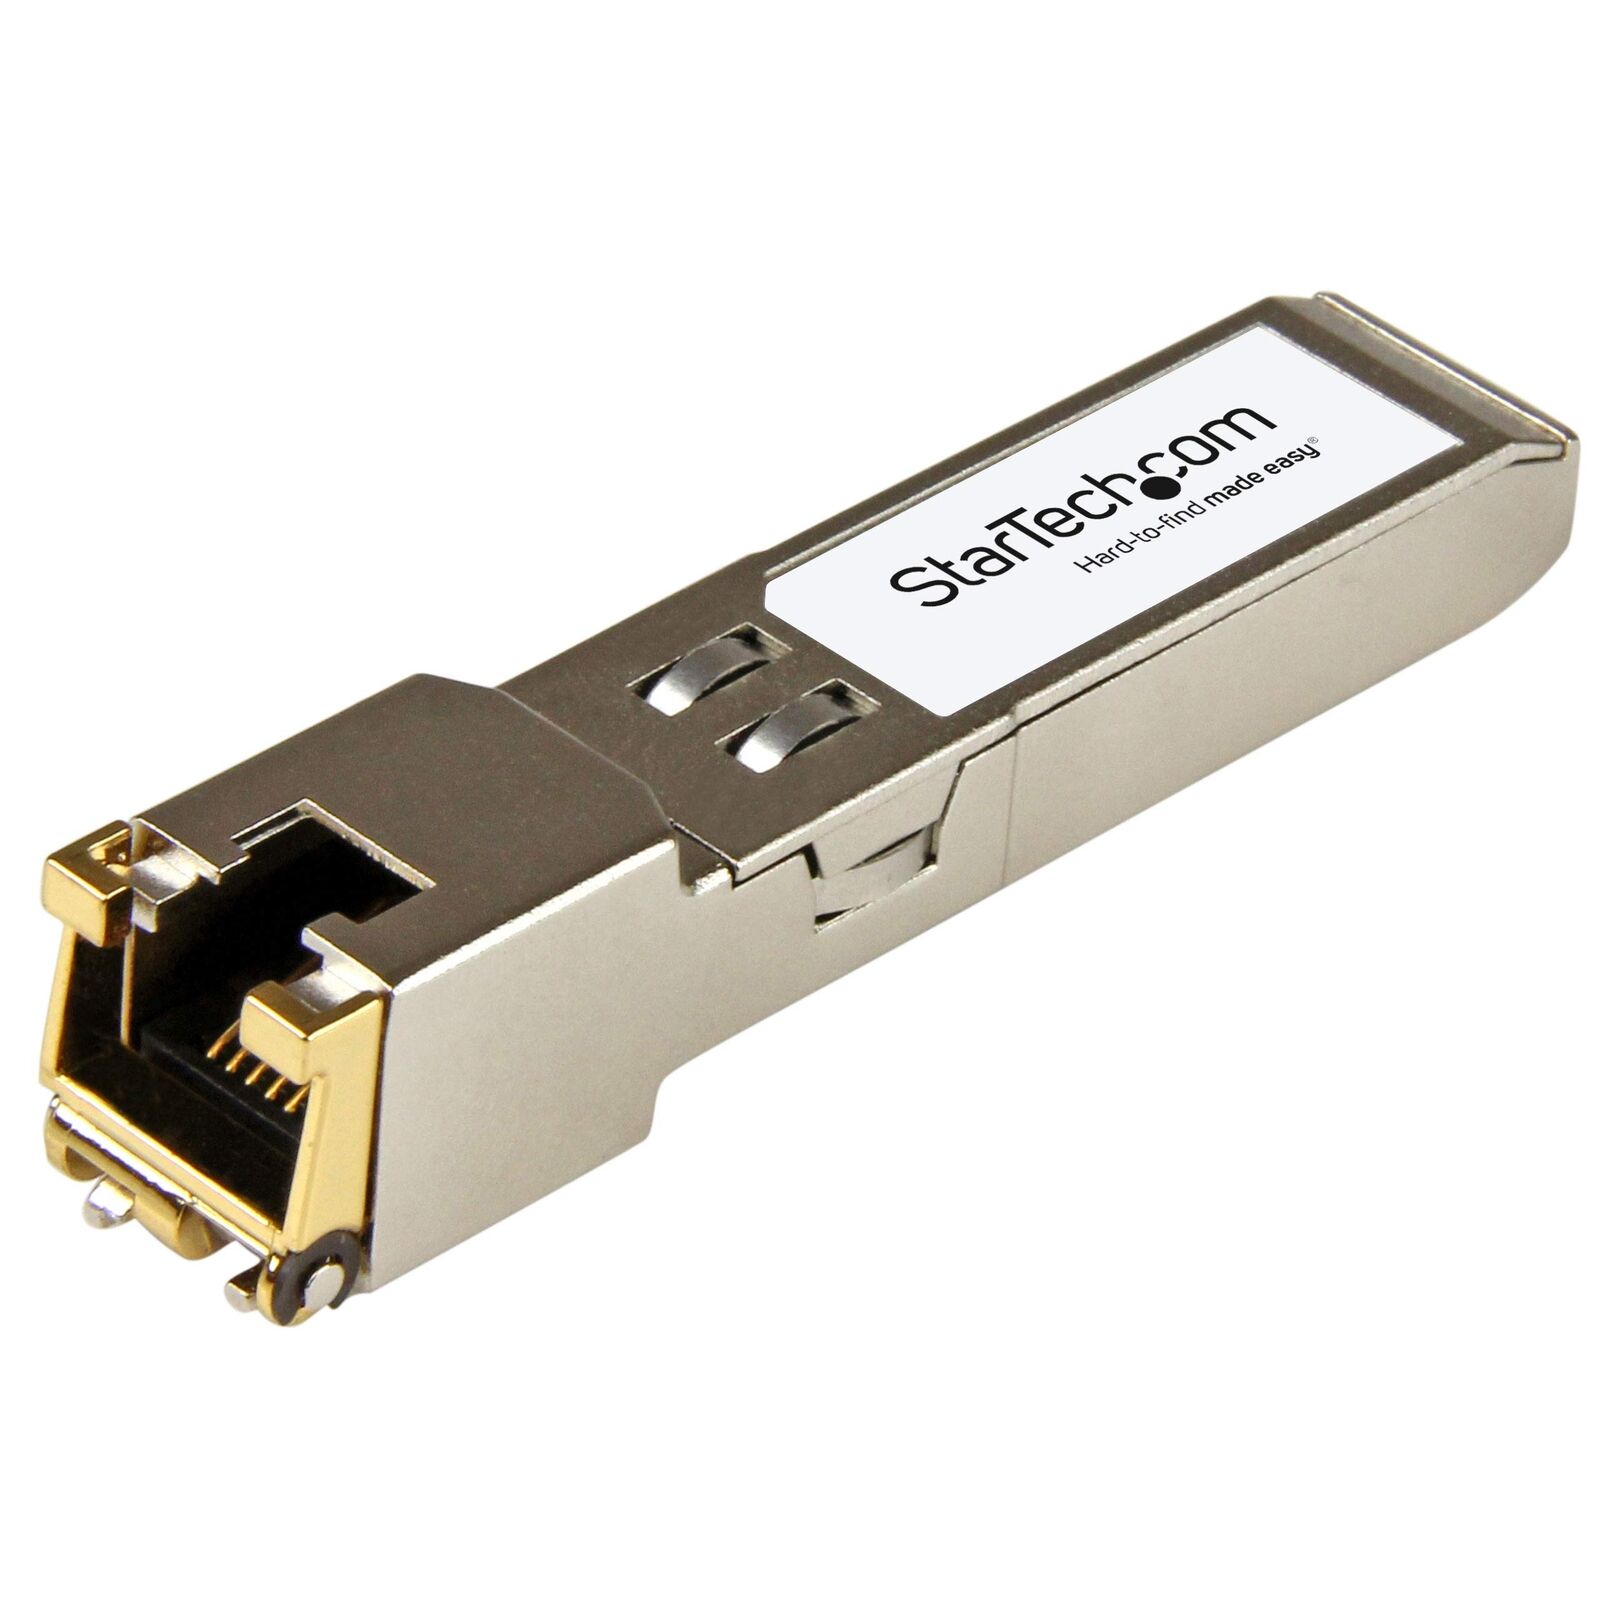 StarTech.com Extreme Networks 10050 Compatible SFP Module - 1000BASE-T - SFP to 